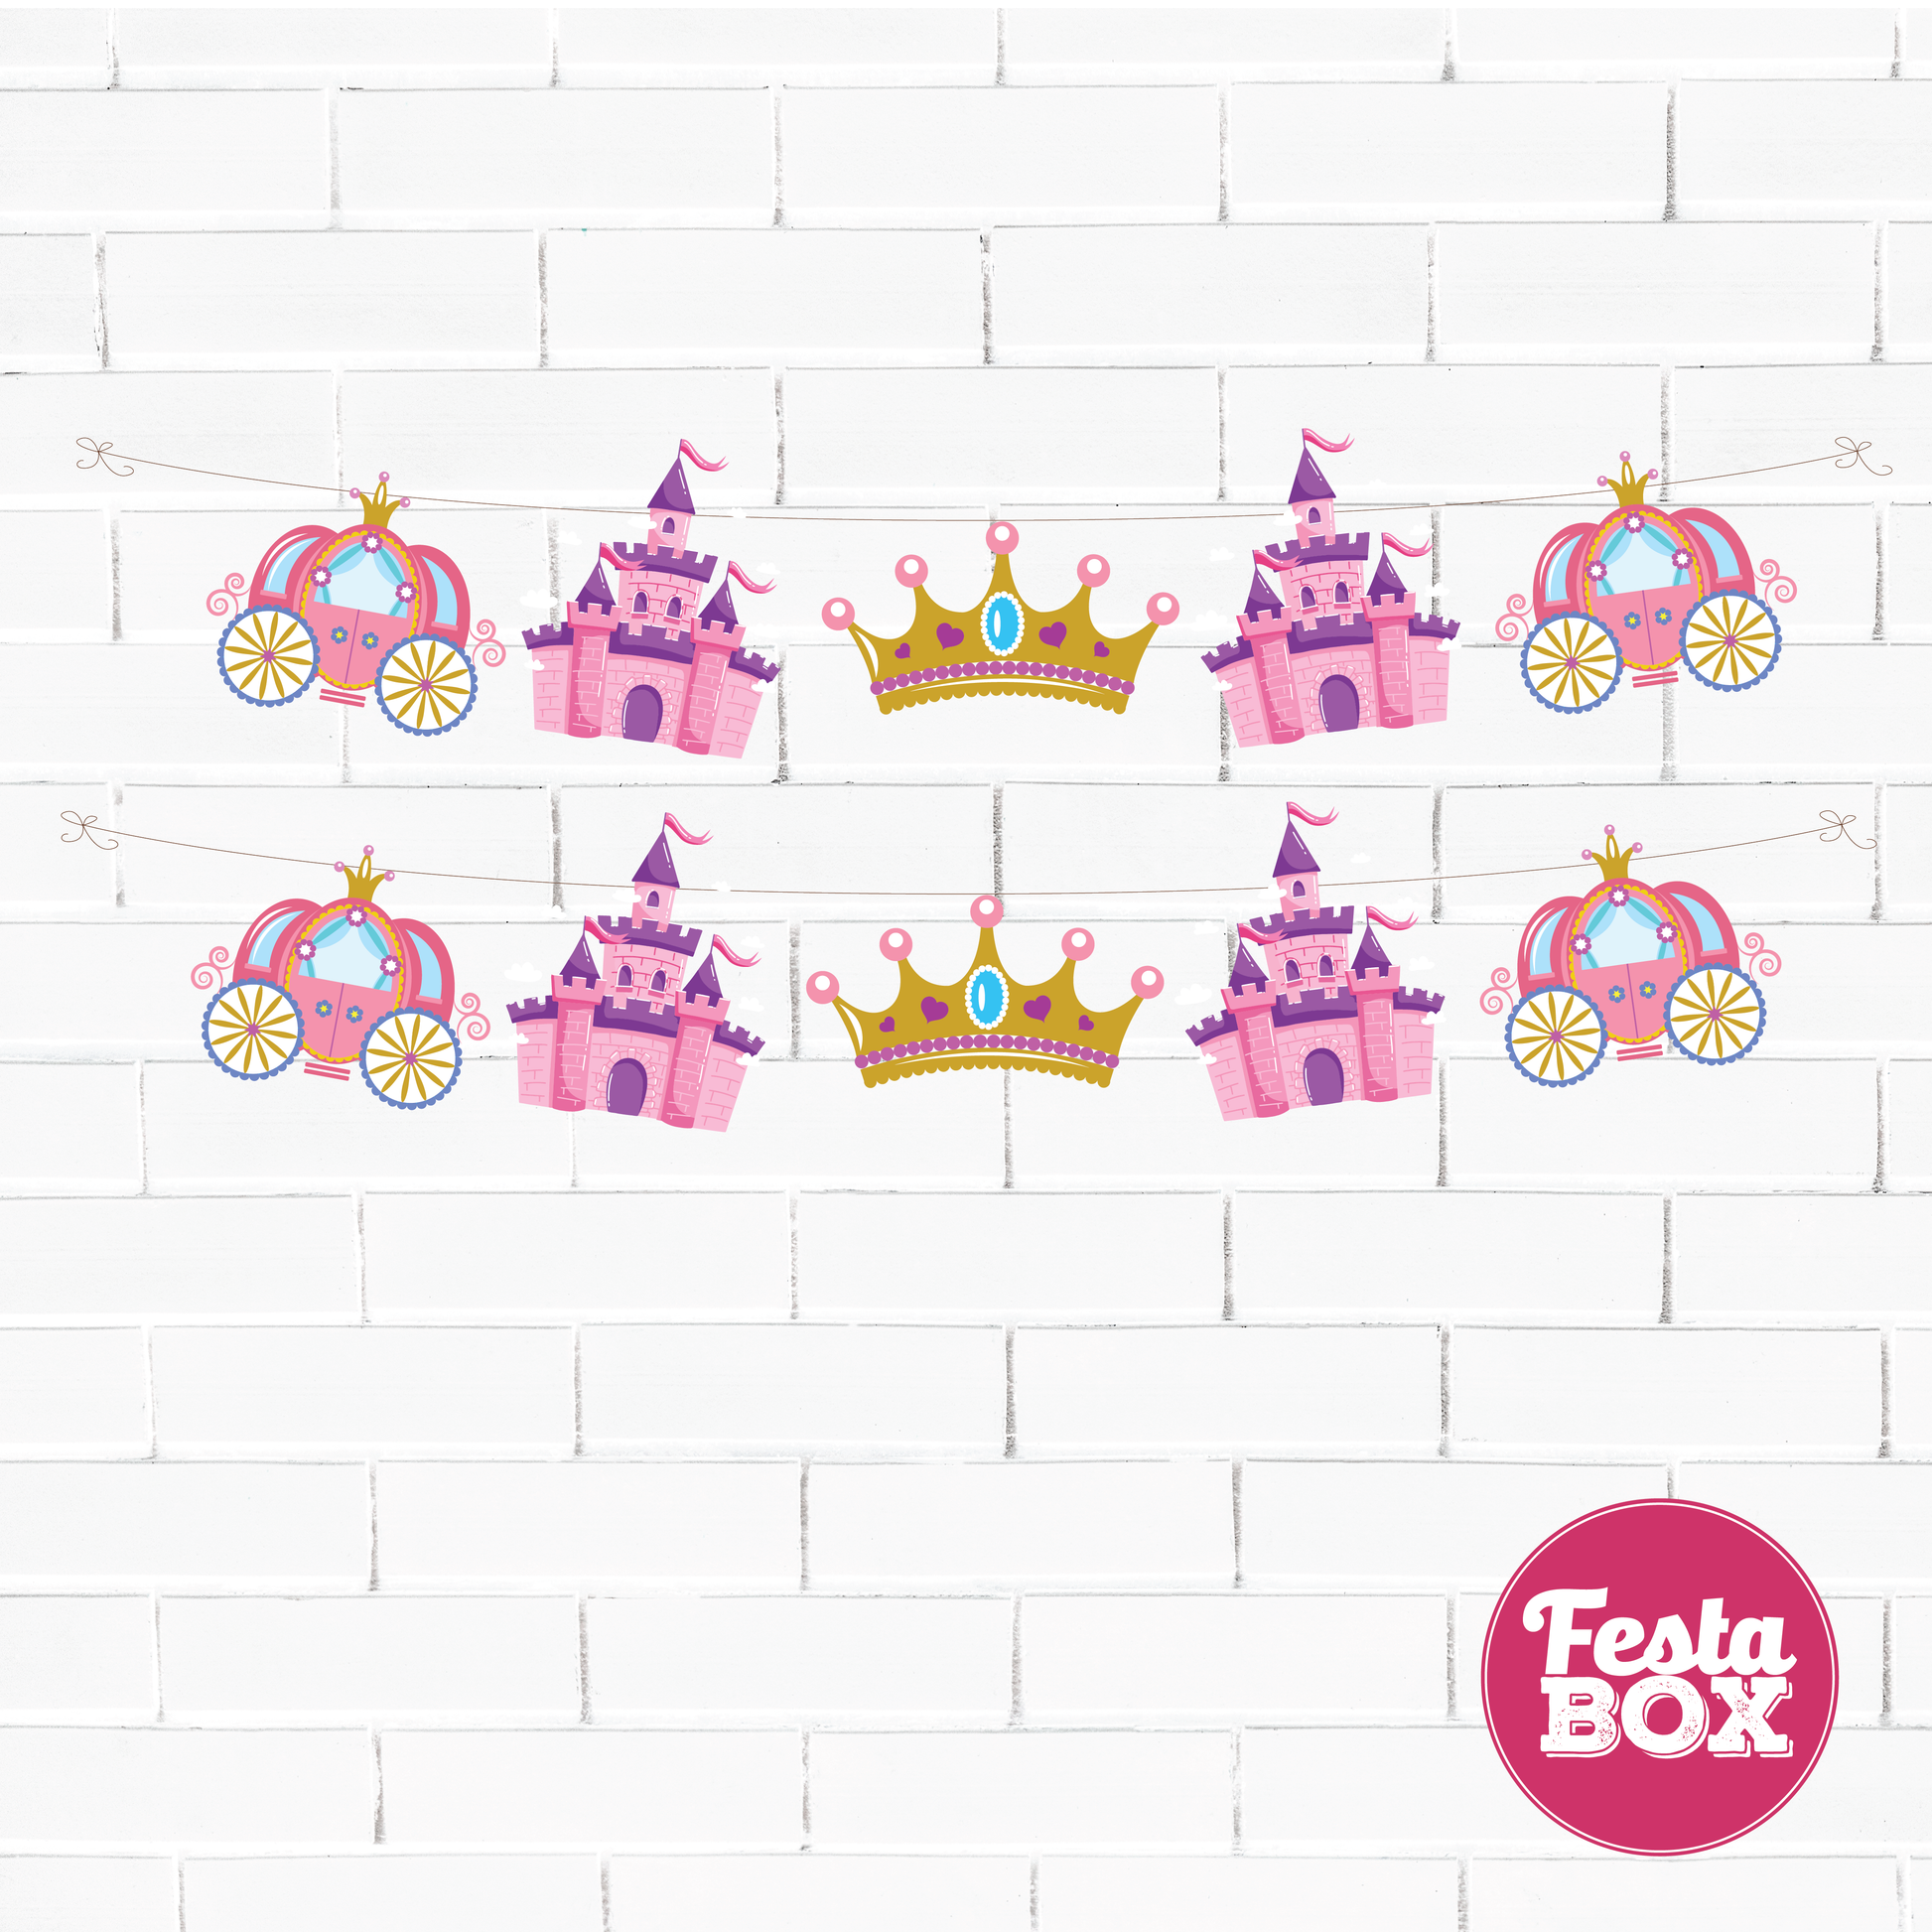 Background Banner for Birthday Party Decoration - Princess Theme - Option 1